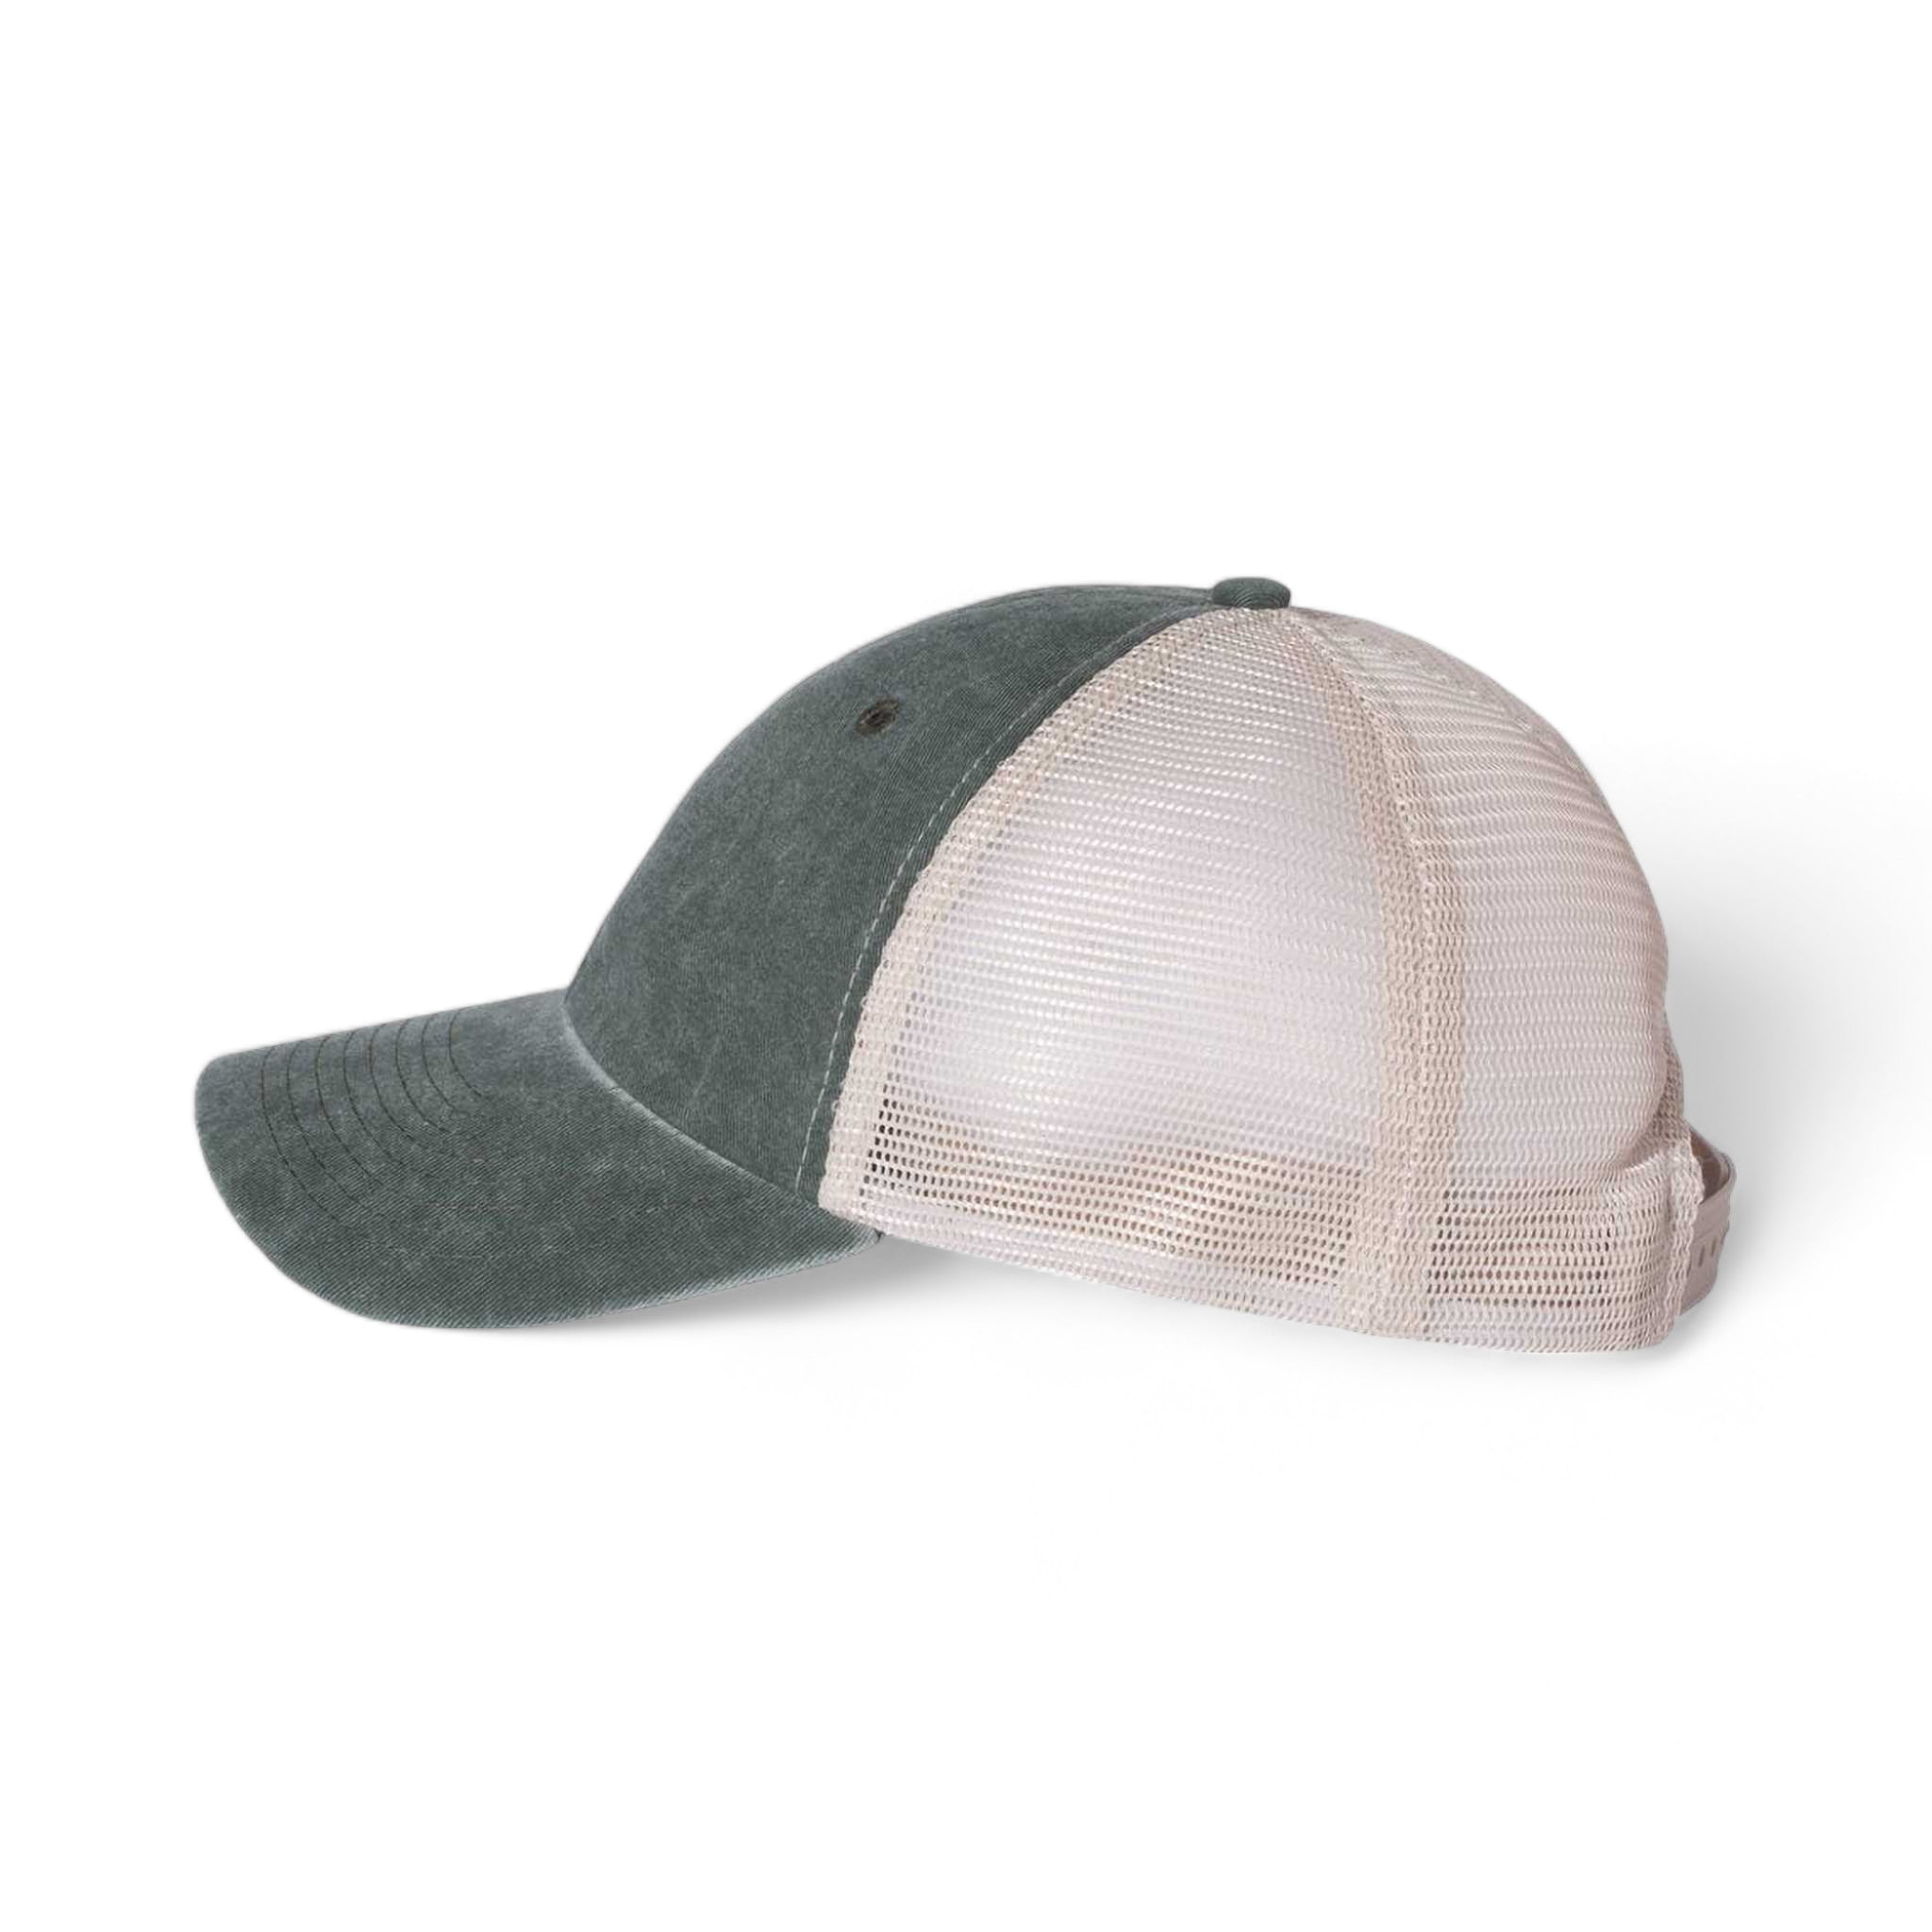 Side view of Sportsman SP510 custom hat in forest and stone